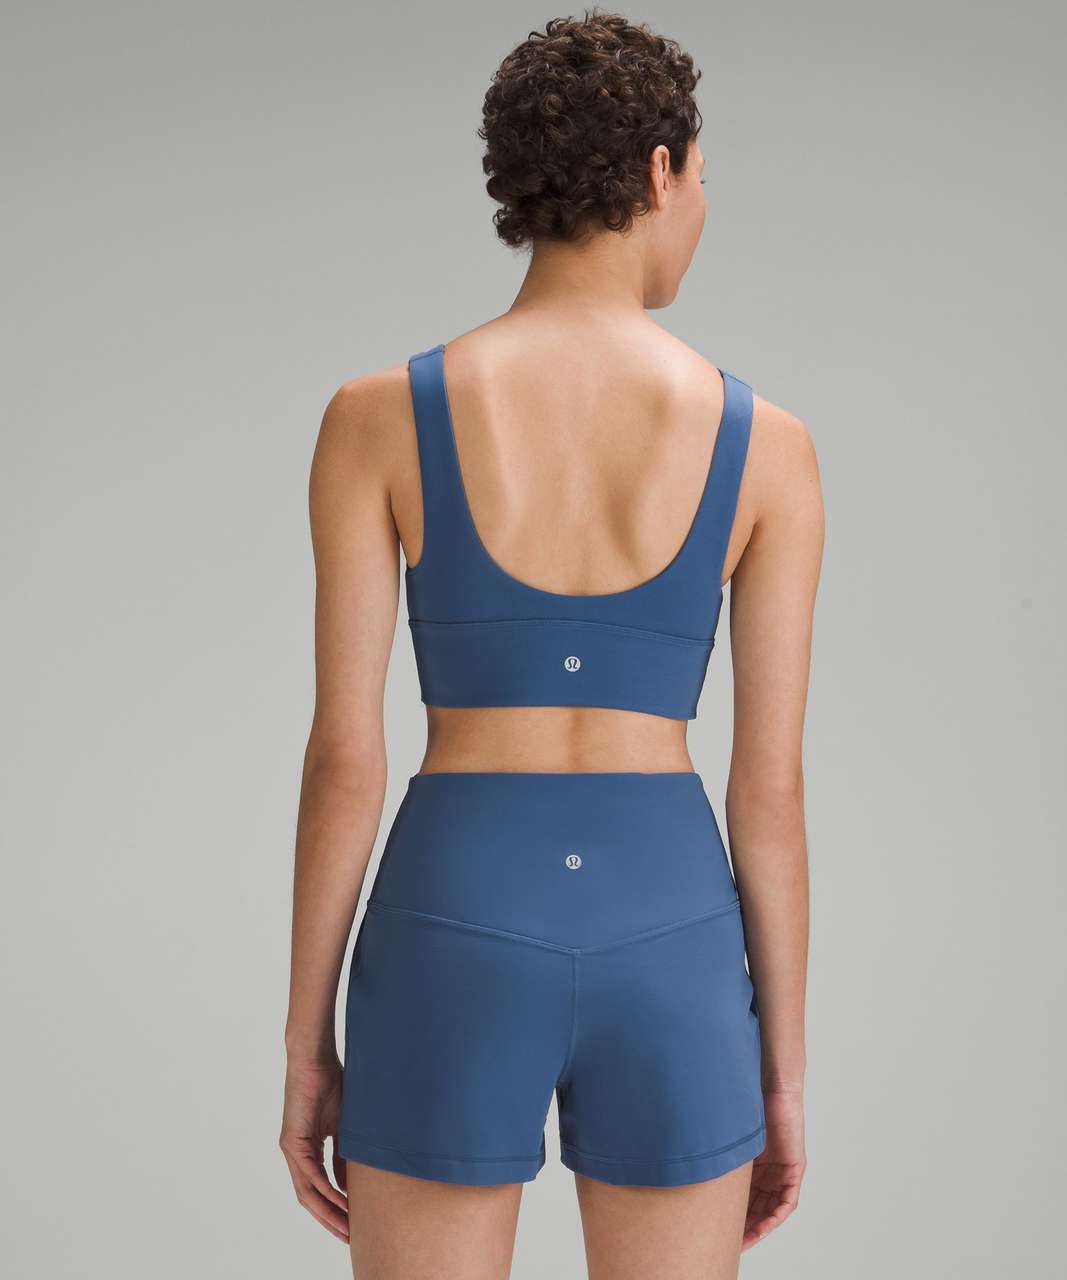 Lululemon Align™ Reversible Bra Light Support, A/b Cup In Silver Blue/white  Opal